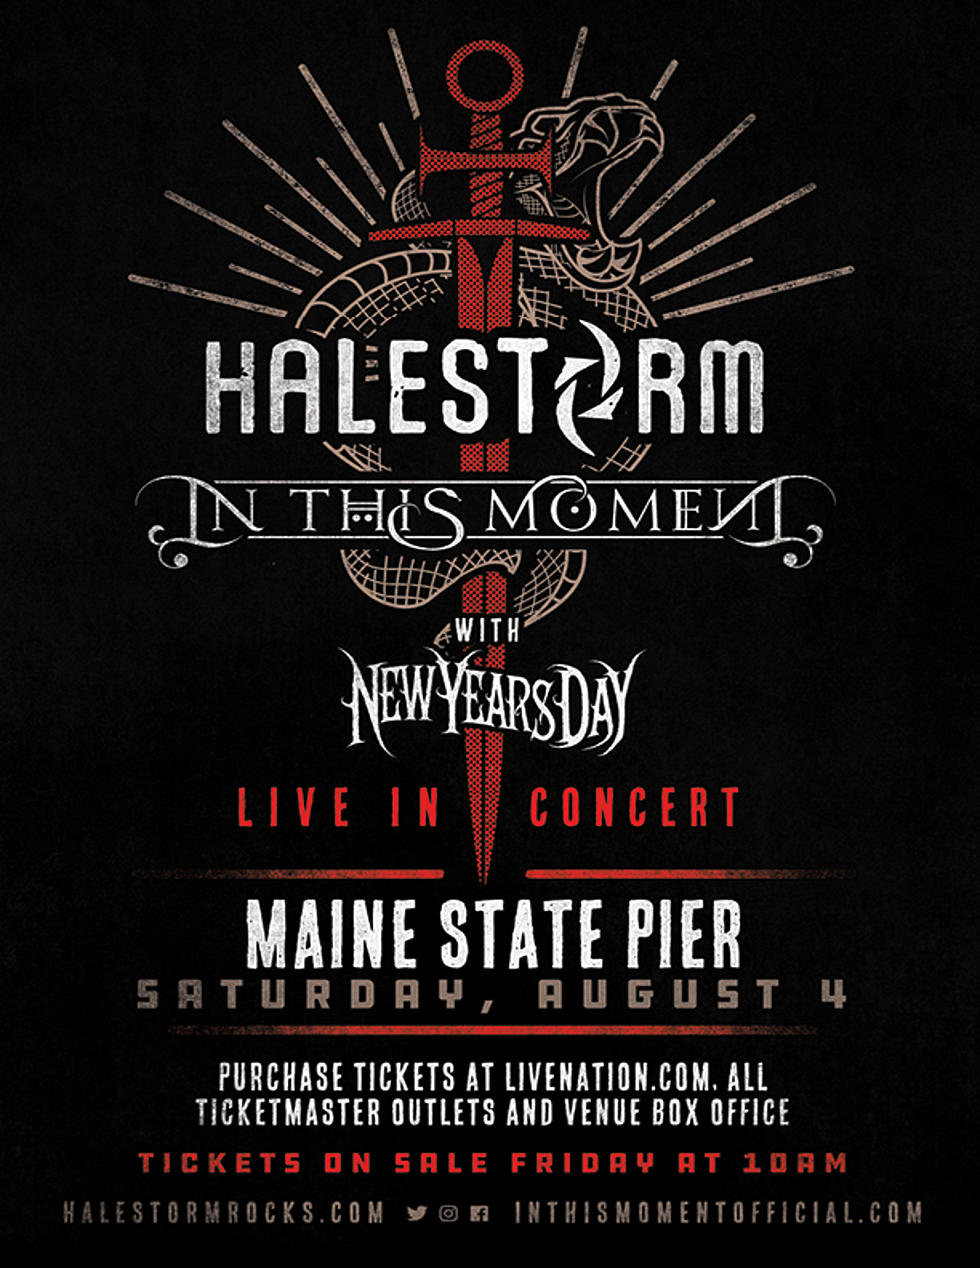 Halestorm, In This Moment To Rock Maine State Pier This August